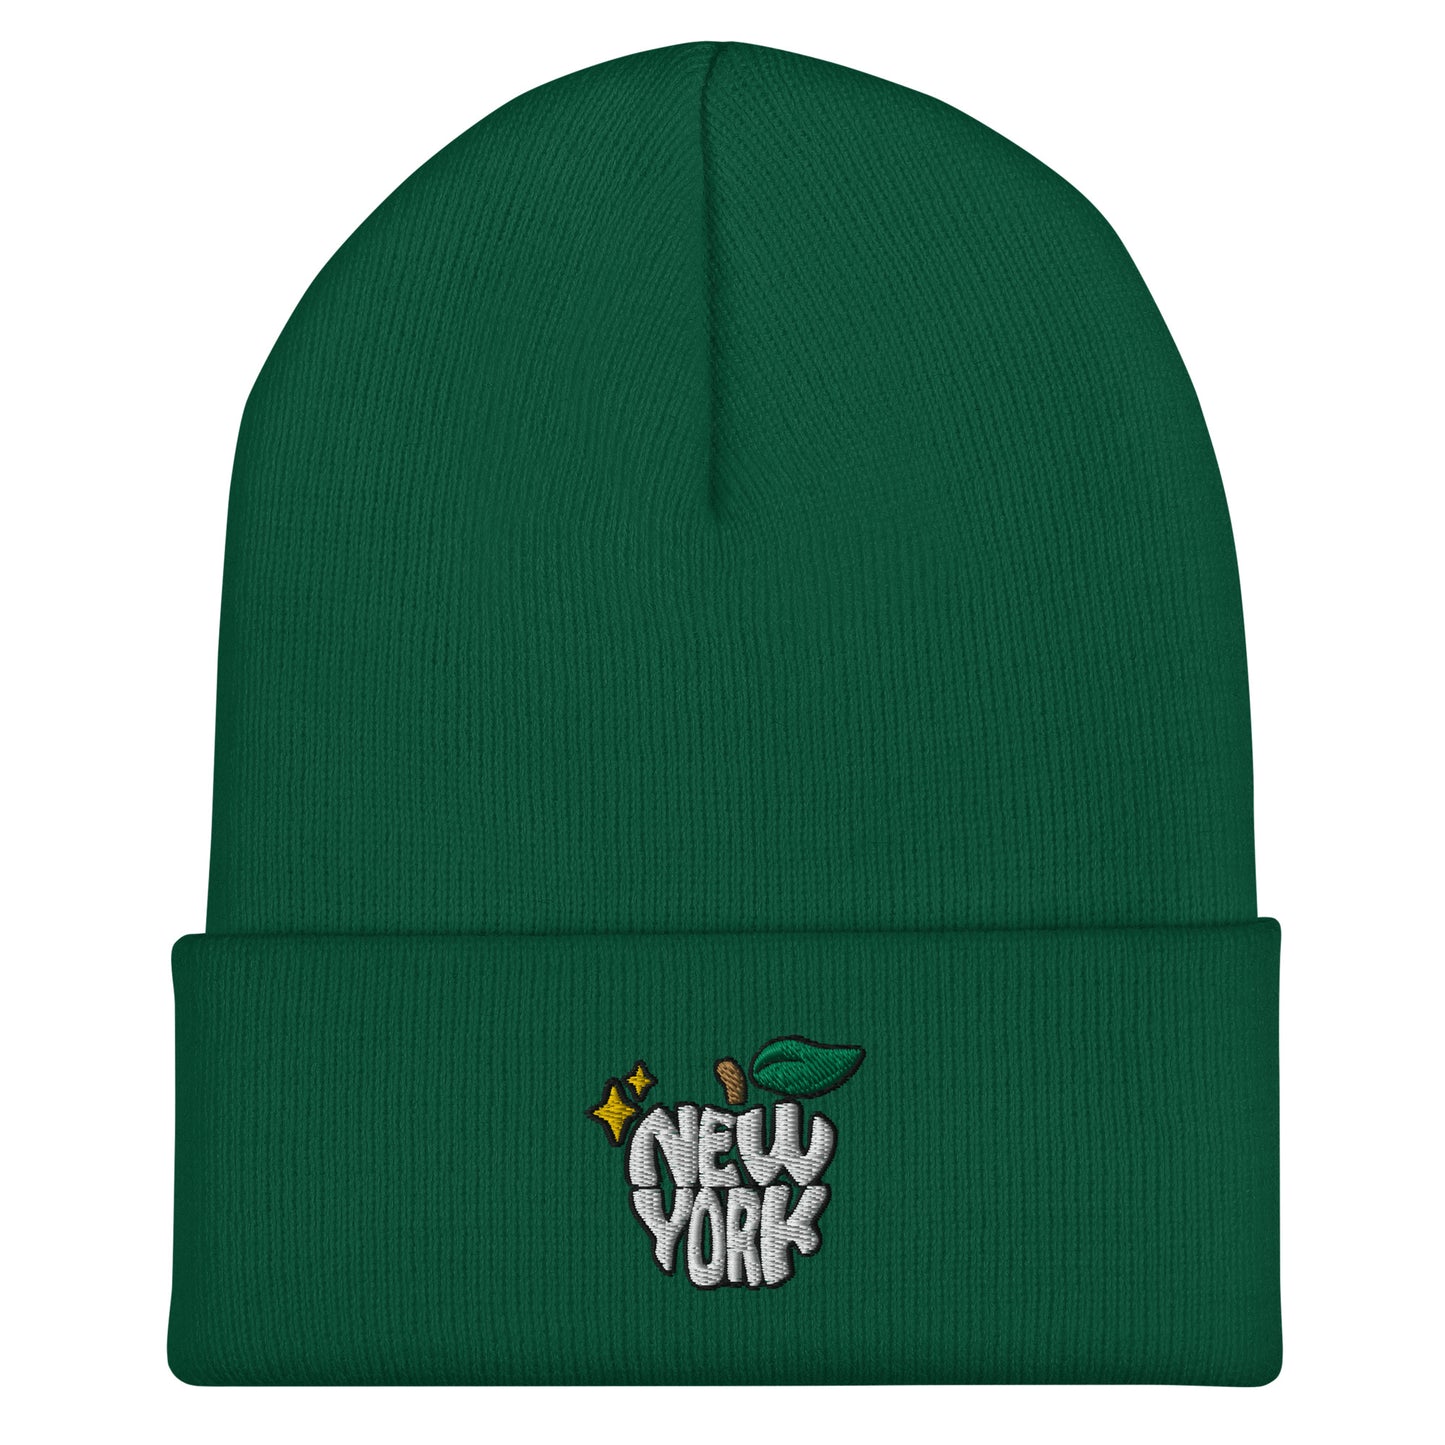 New York Apple Logo Embroidered Green Cuffed Beanie Hat Scattered Streetwear